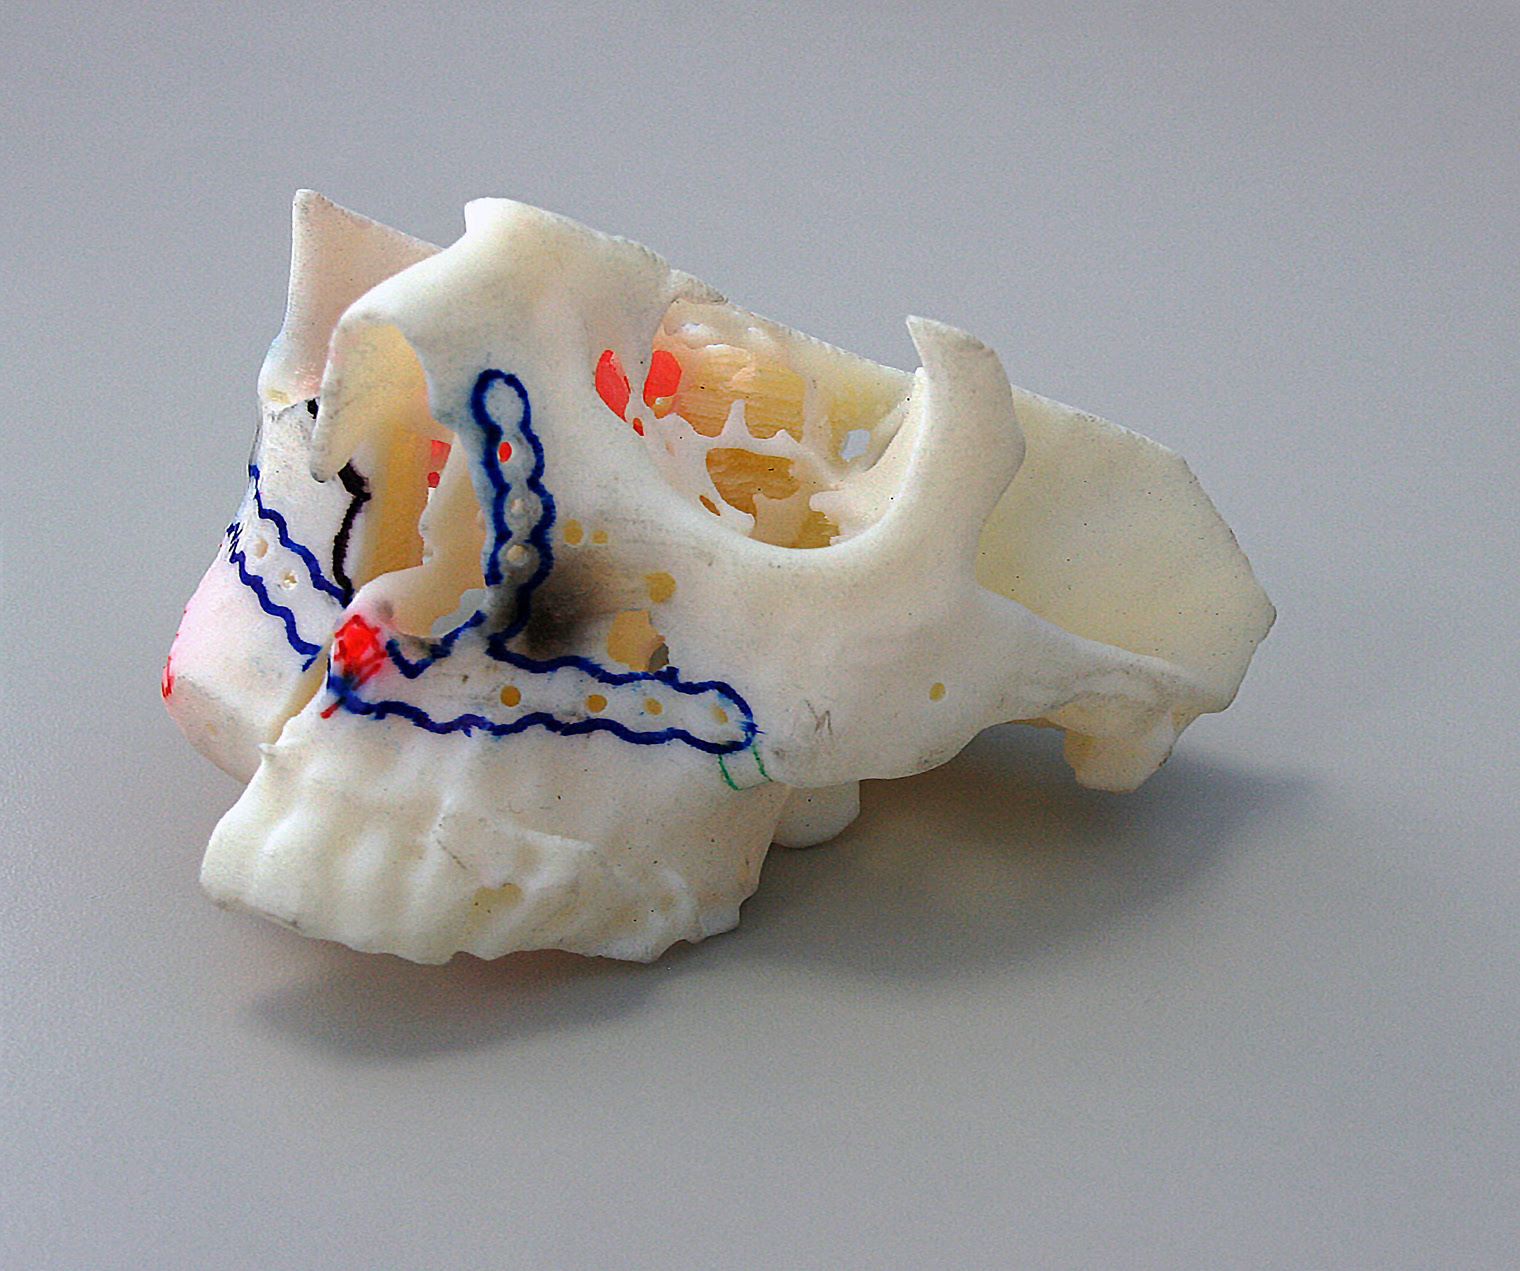 The in-house Stratasys 3D Printer enables the creation of exact replicas of the patient’s anatomy and allows customised fittings and pre-bending of plates